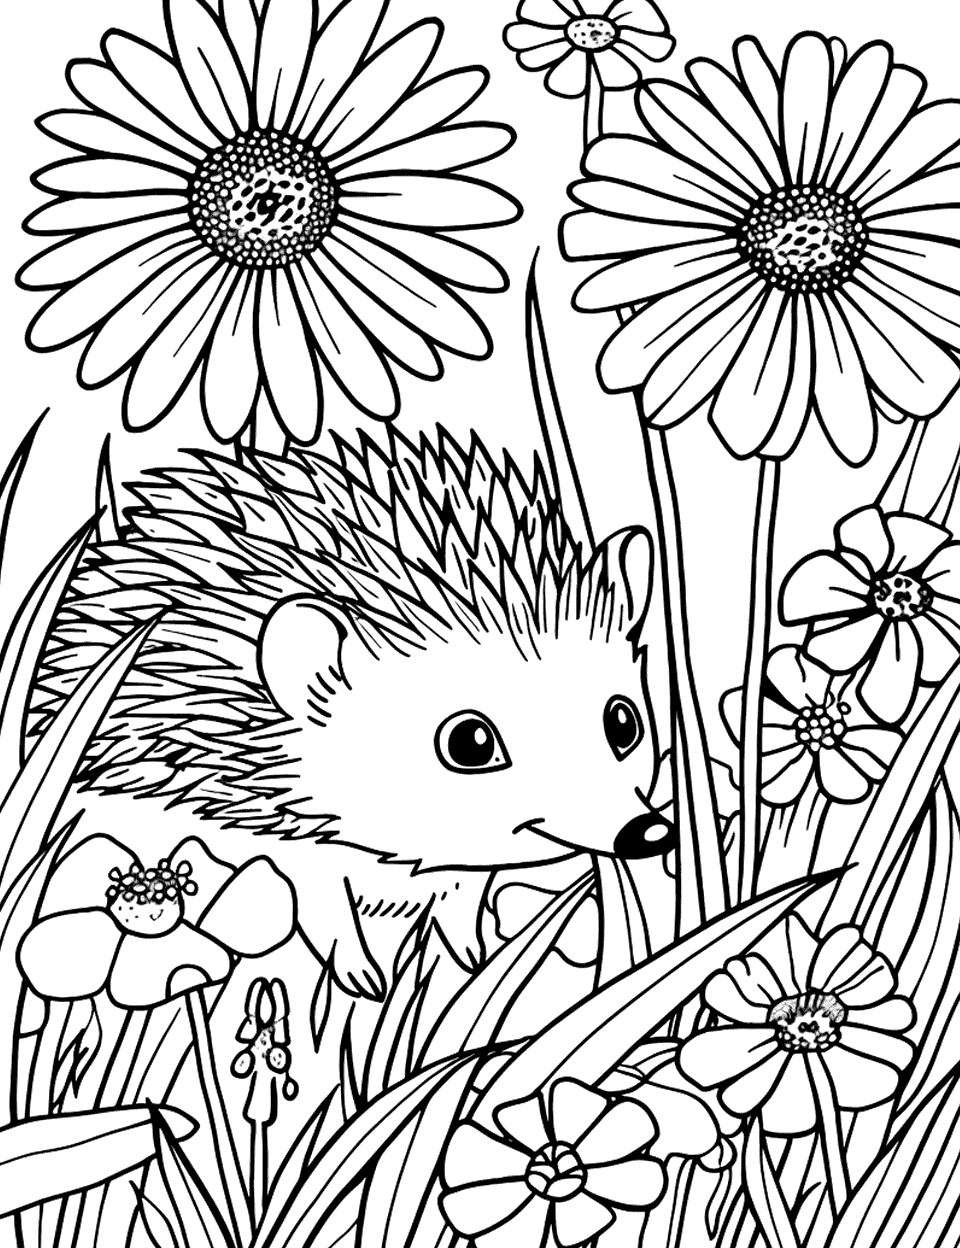 Hedgehog in the Grass Garden Coloring Page - A hedgehog wandering through a patch of grass looking for food in a country garden.